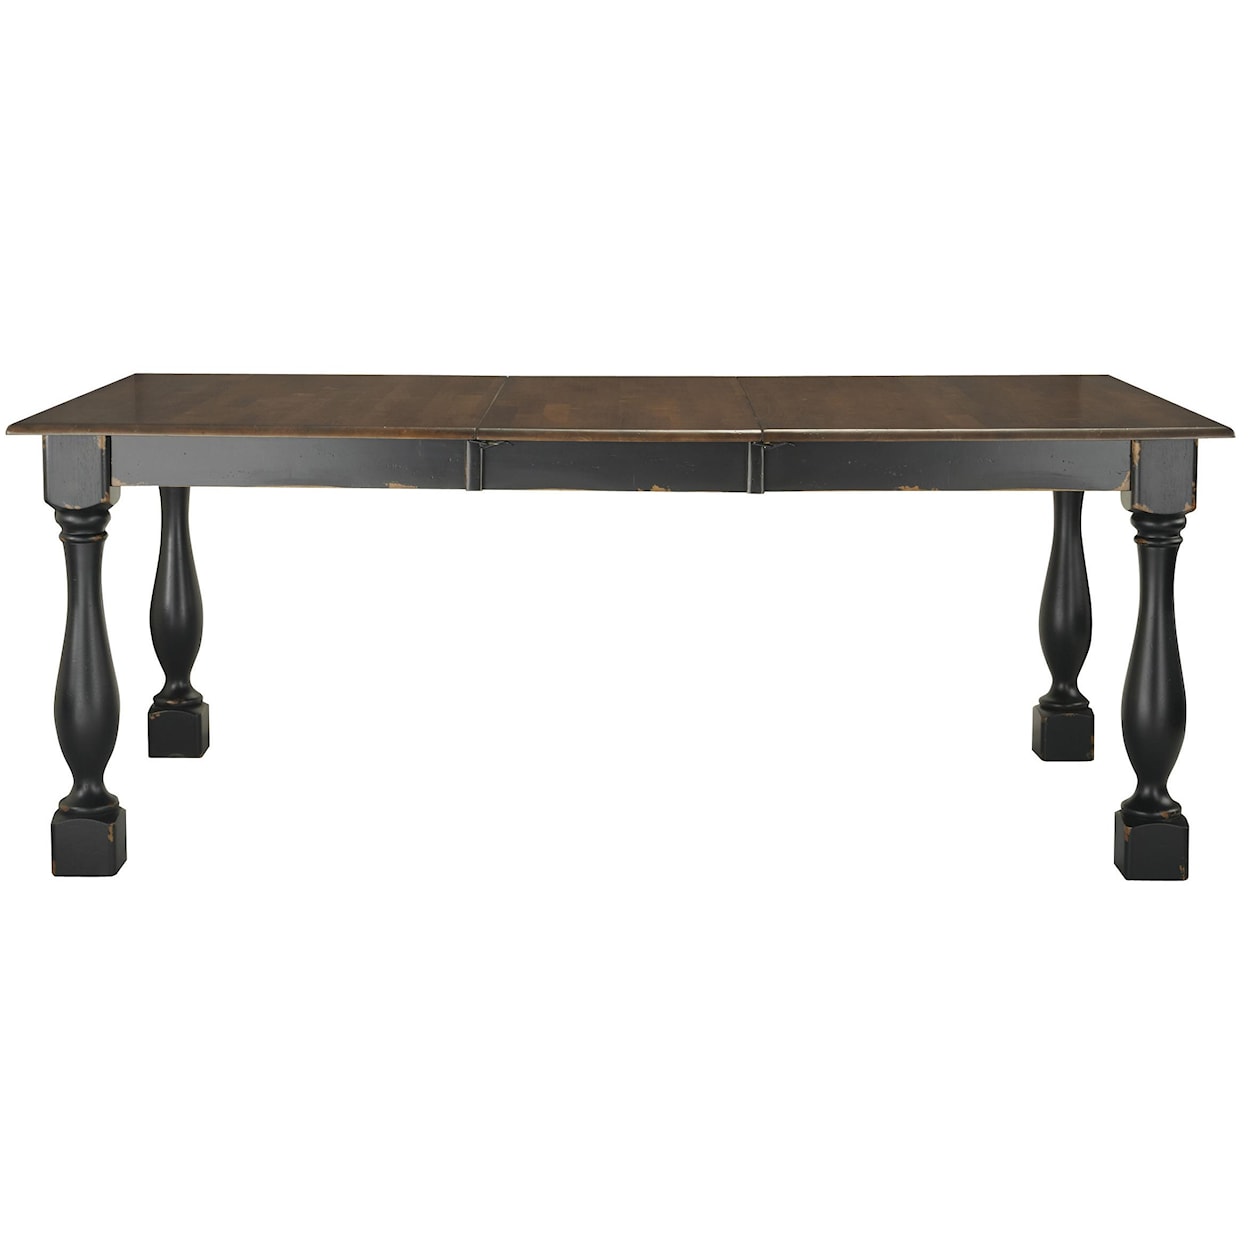 Whitewood Dining Room Pieces Dining Table